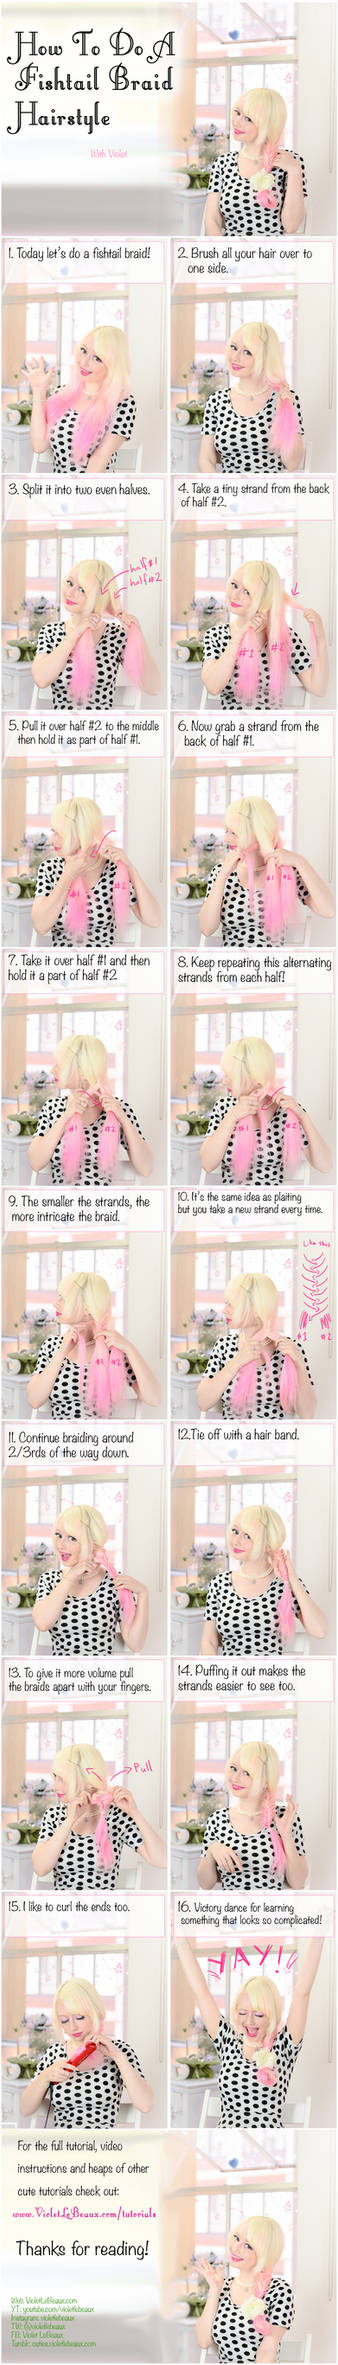 How To Do A Fishtail Braid - Hairstyle Tutorial